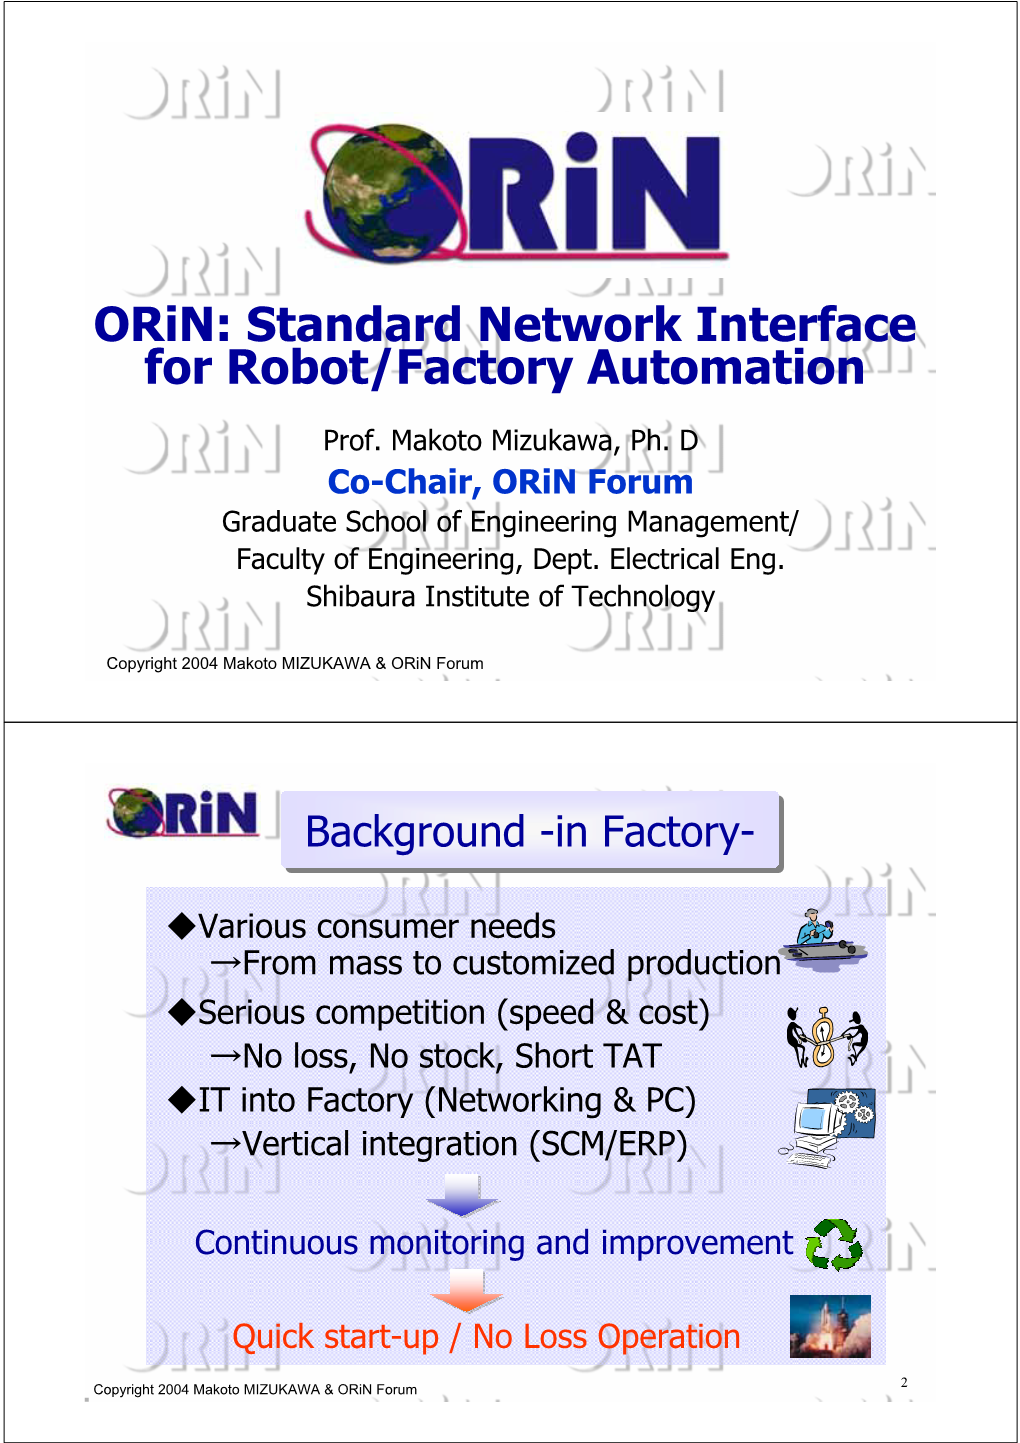 Orin: Standard Network Interface for Robot/Factory Automation